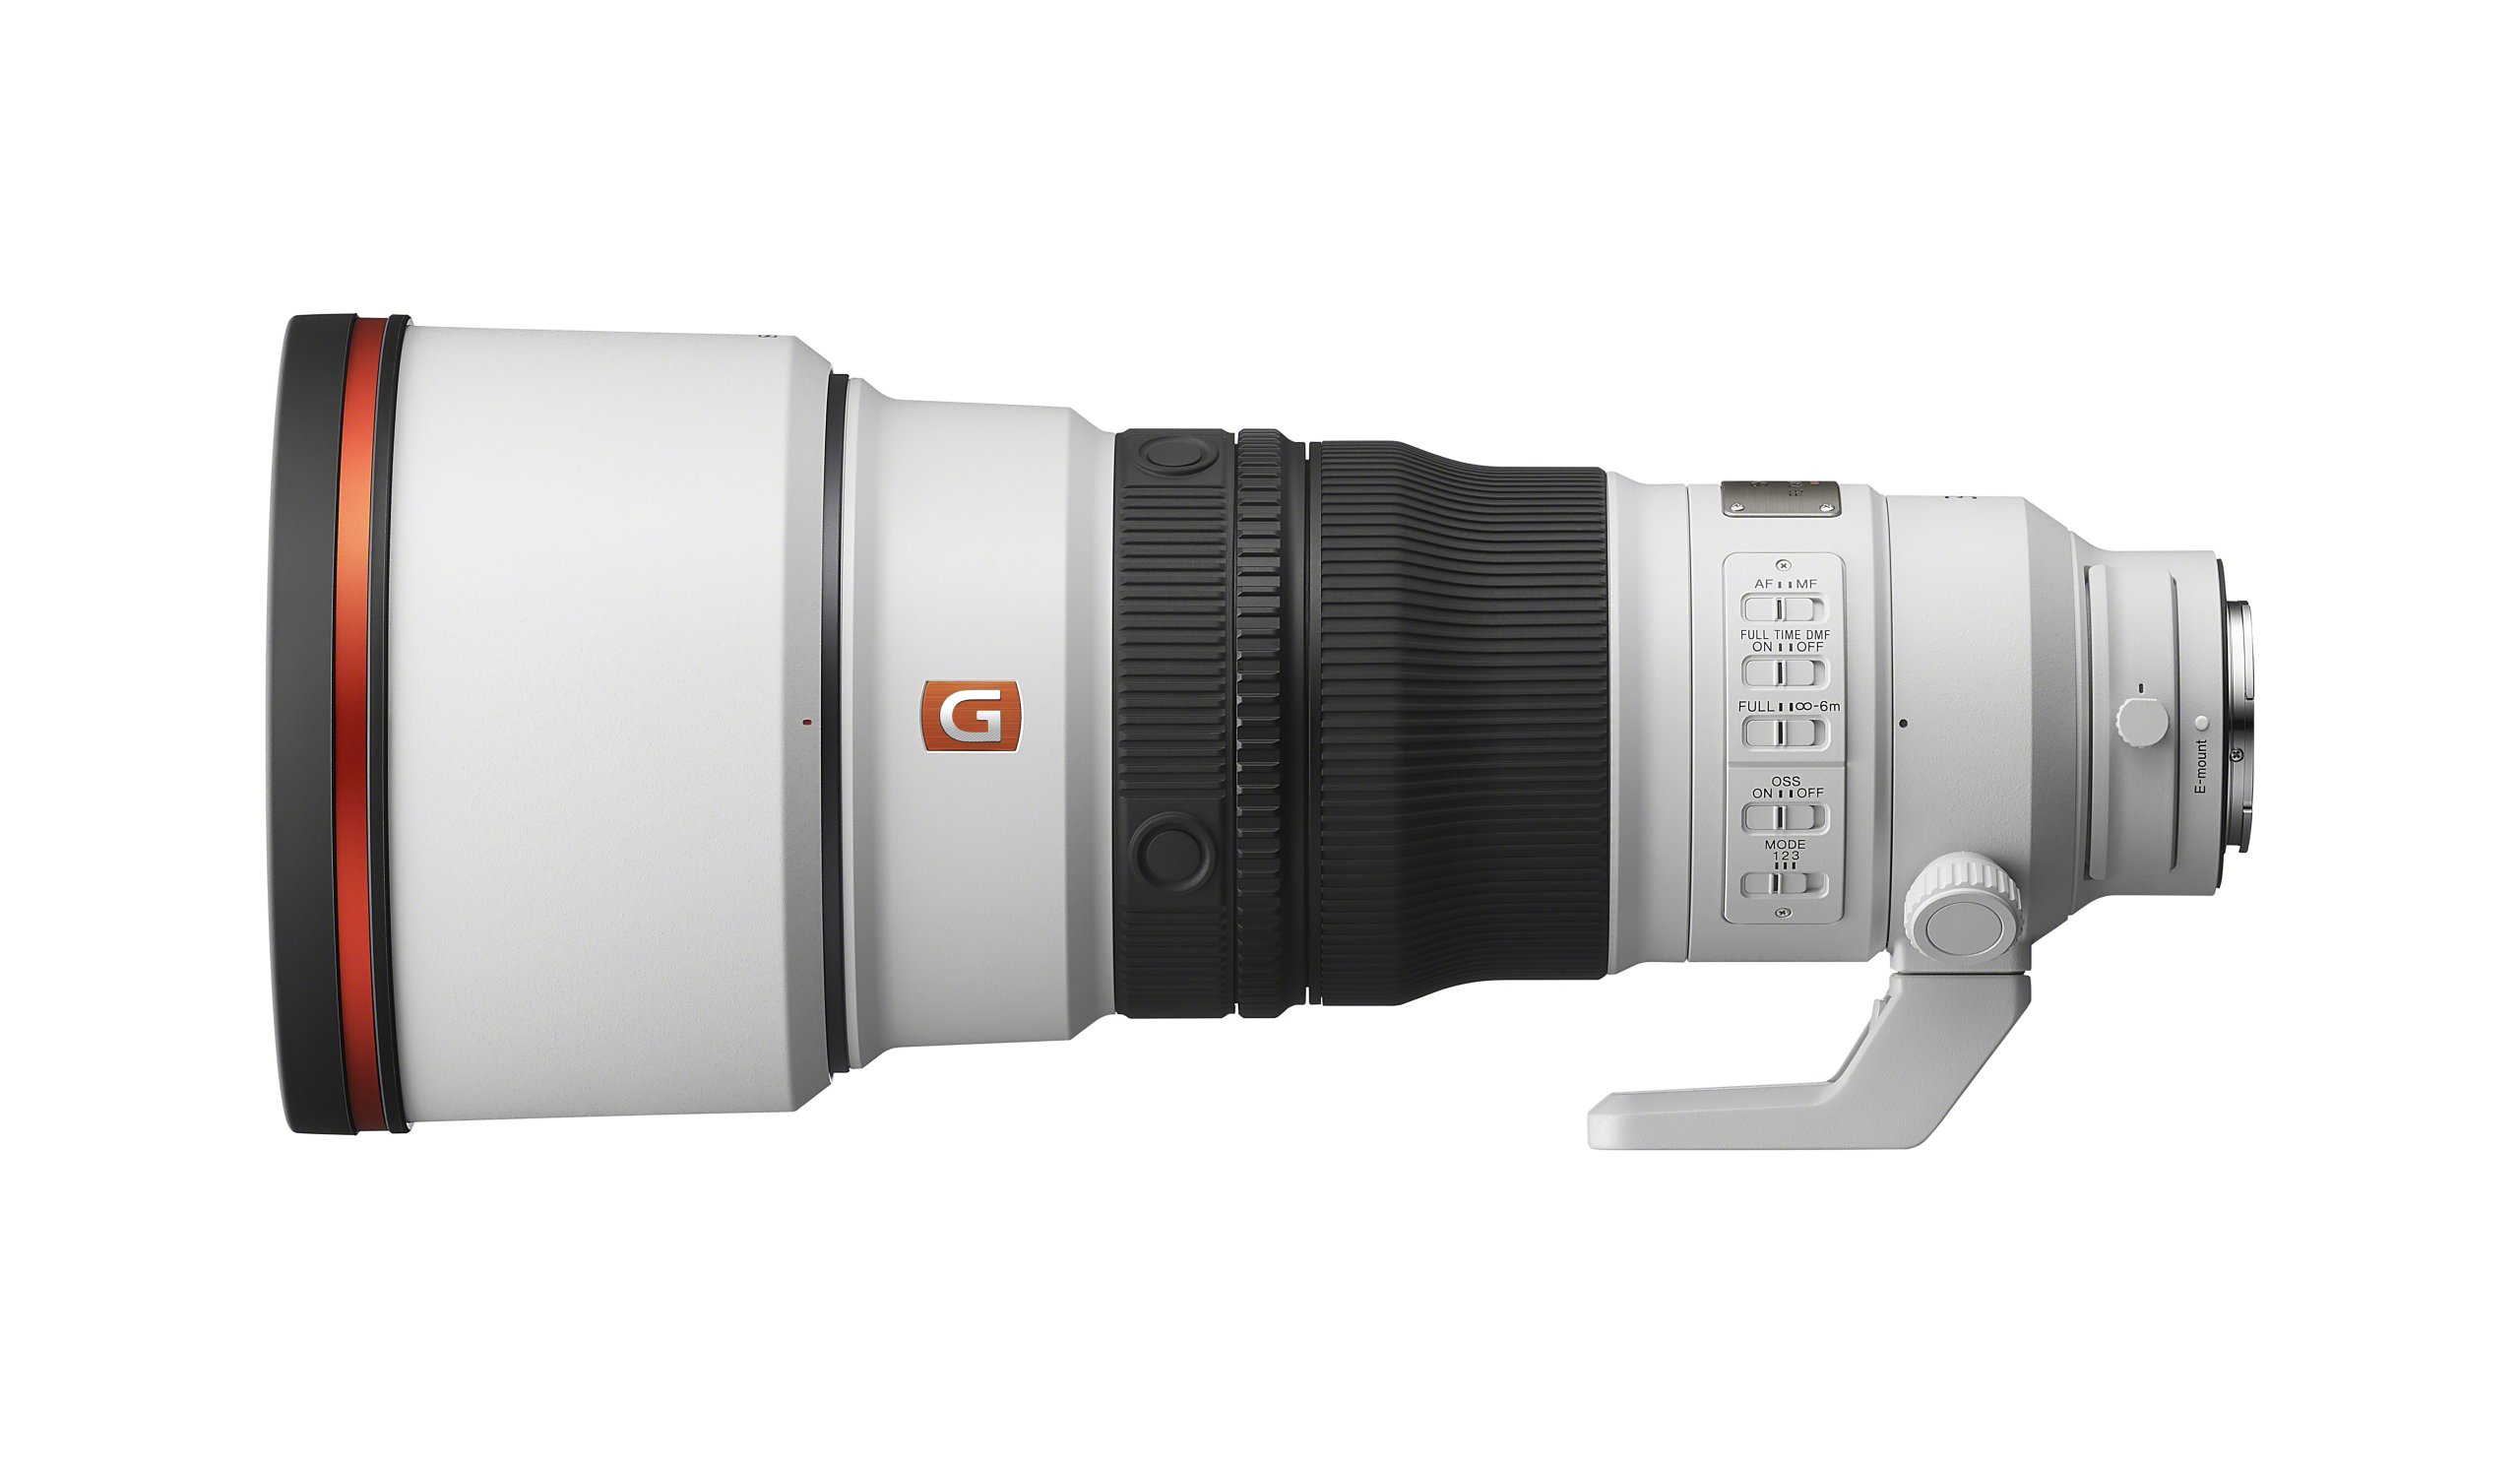 SEL300F28GM F scaled - Sony Electronics Releases 300mm F2.8 G Master OSS; the World’s Lightest Large-Aperture Telephoto Prime Lens